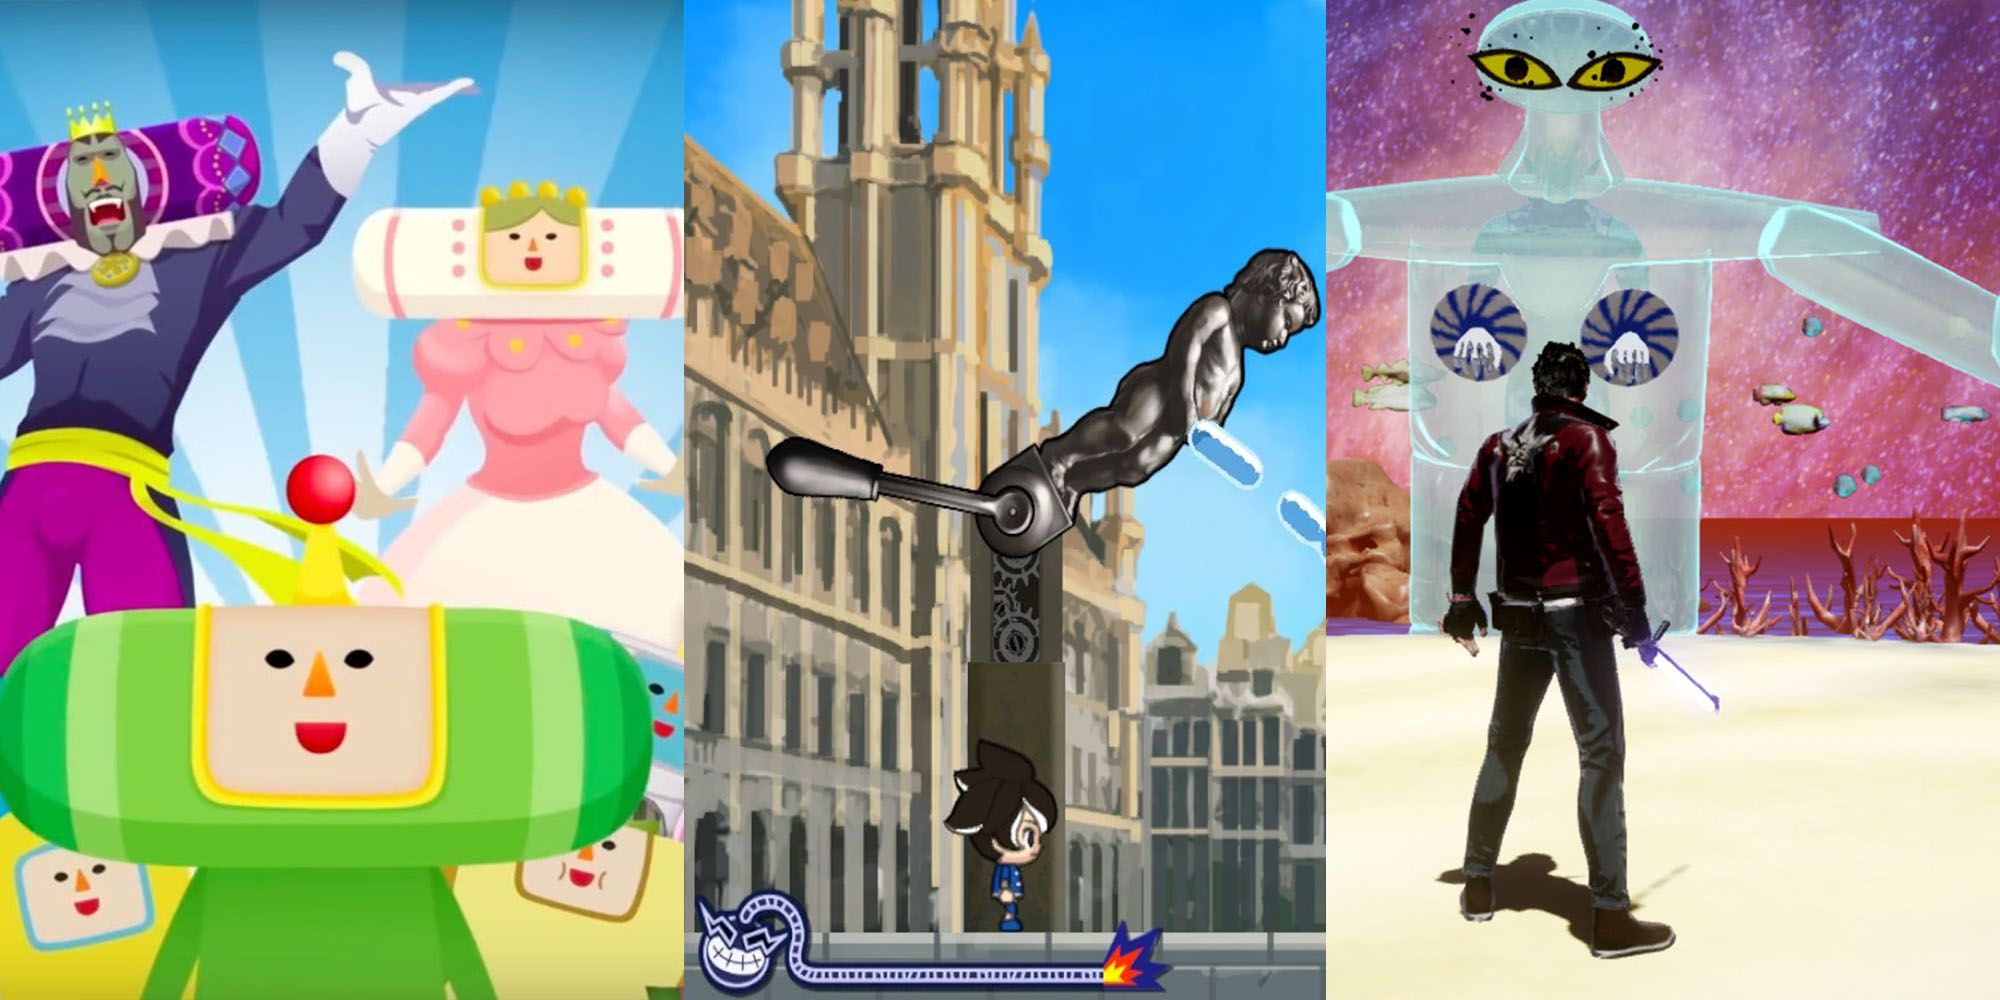 A collage of three games, Katamari showing the main cast of god-like characters with colorful oblong heads, Warioware Get it Together showing a mechanical statue peeing water outside a british town, and No More Heroes 3 showing a boss fight with Sonic Joice, a transplucent being with amateurish eyes and paper plate looking nipple tassles.